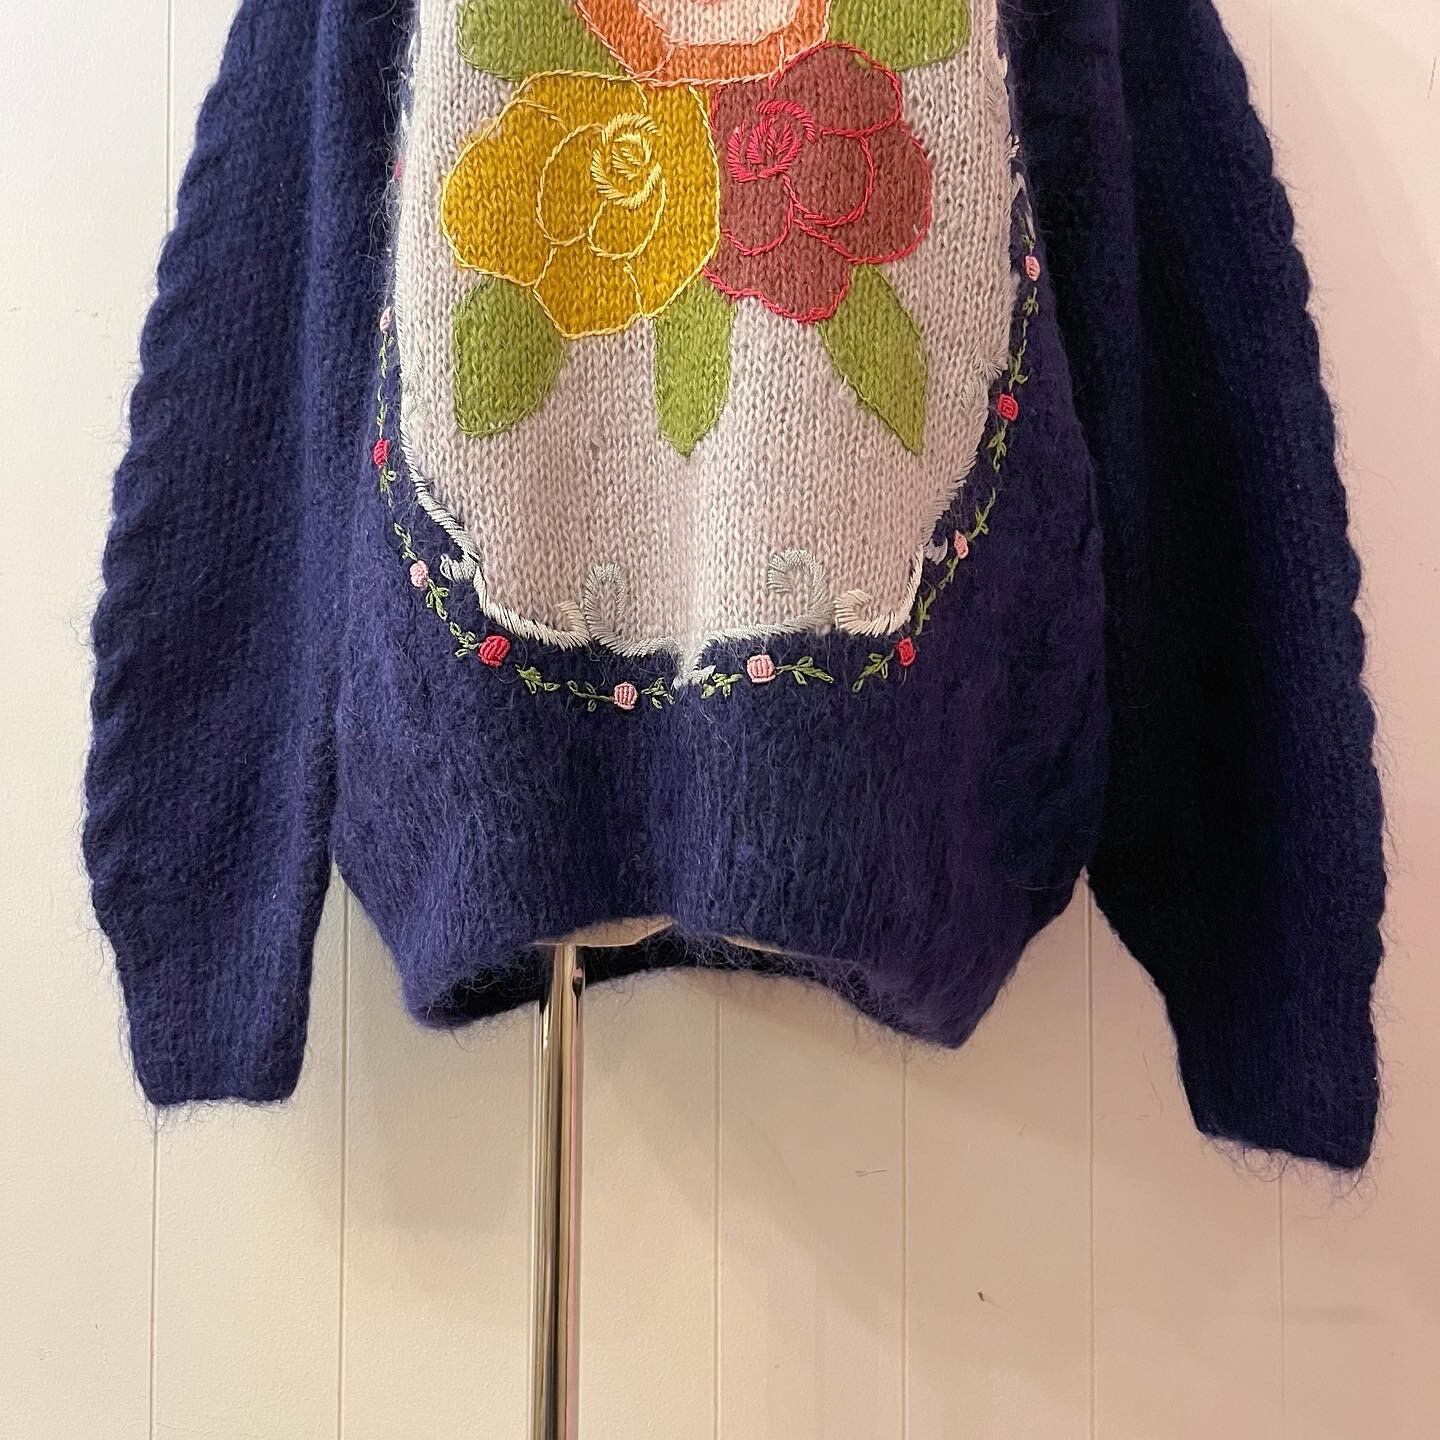 rose frame embroidery knit sweater